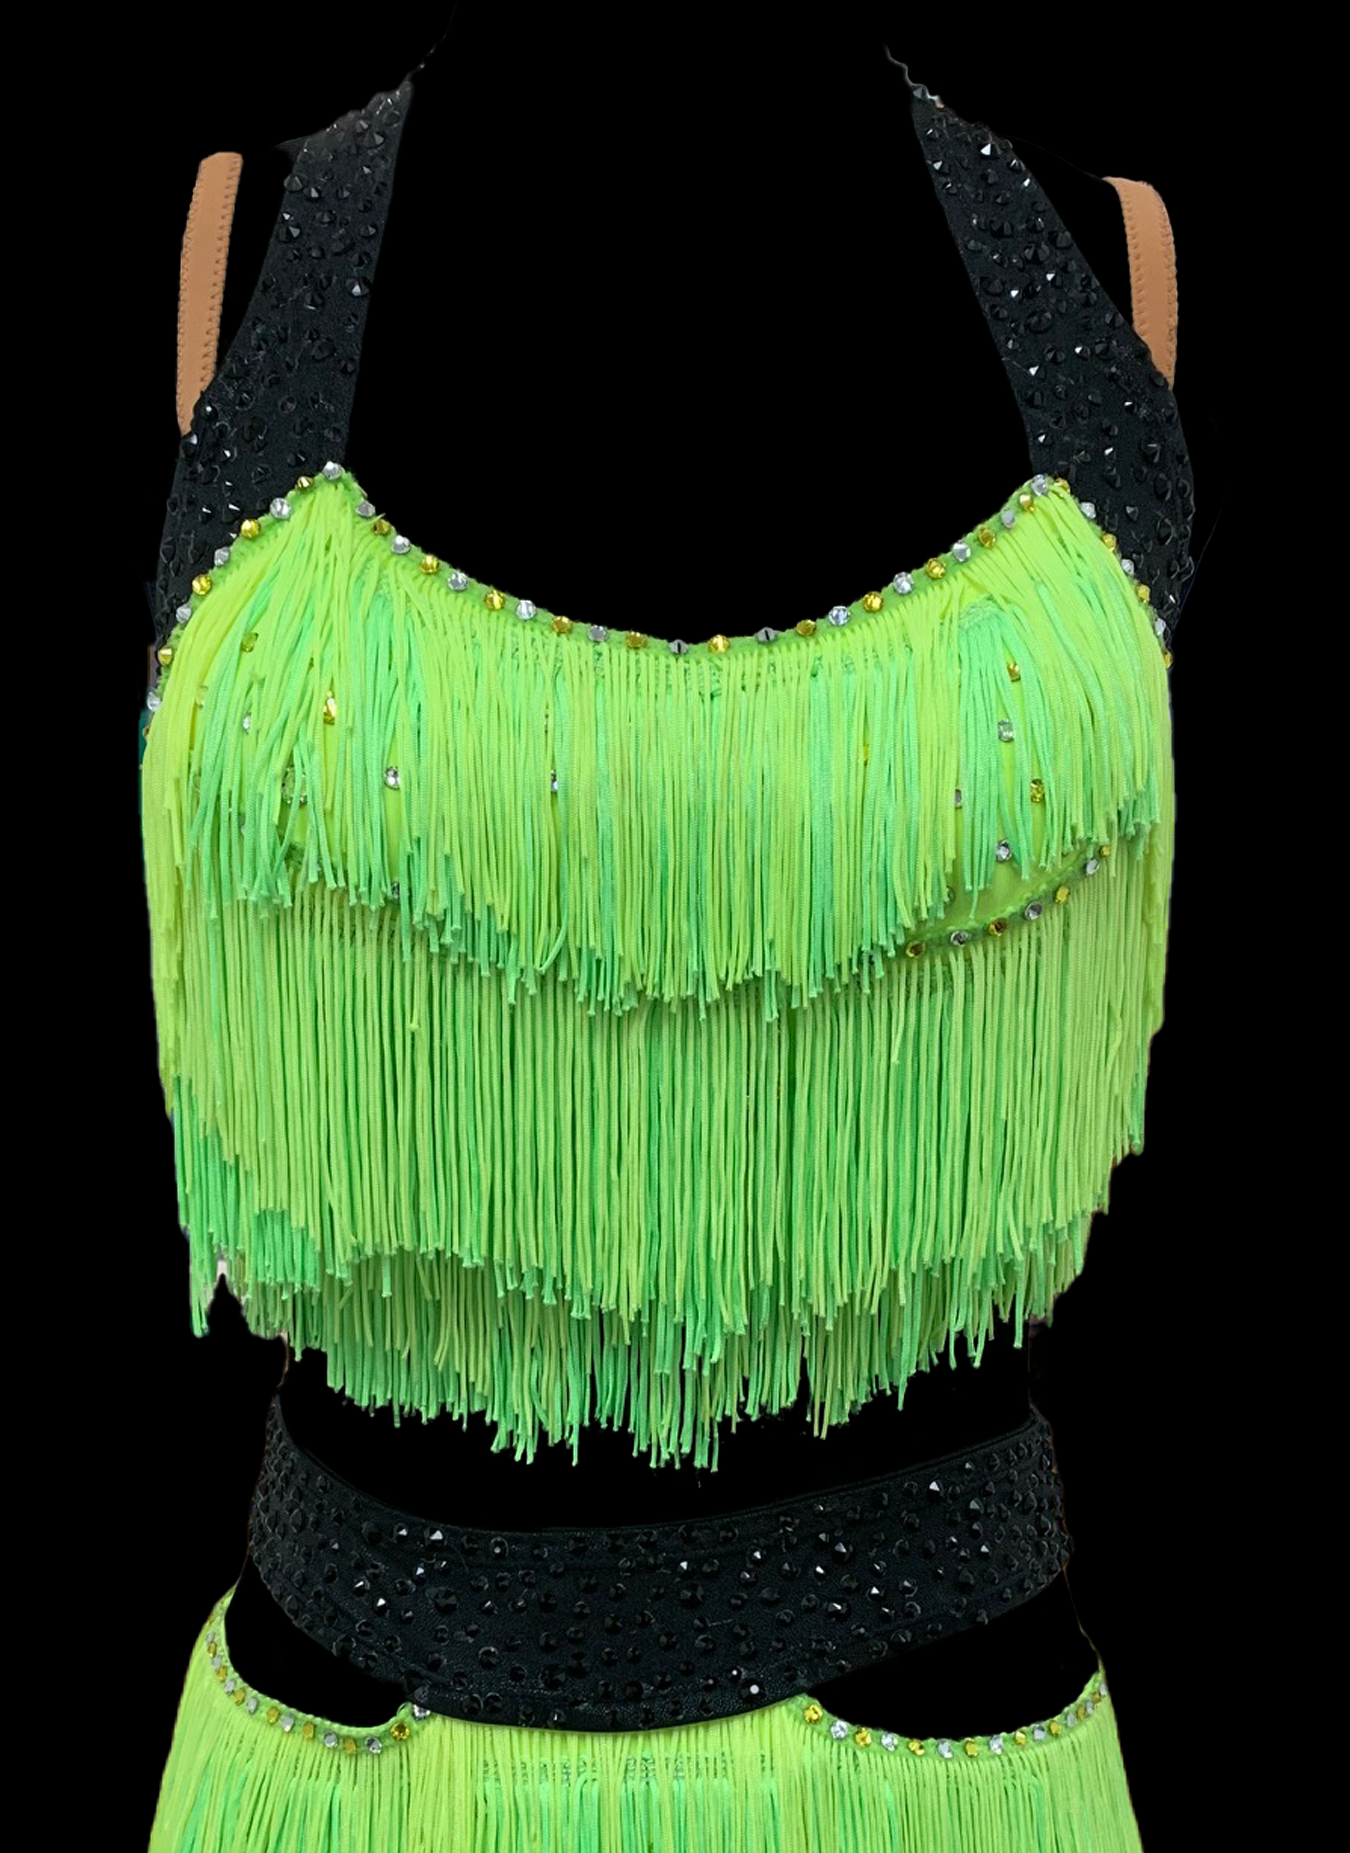 Neon Green Two Piece Latin Dress with Halter Top and Skirt with Layers of Fringe, Swarovski Stones, and Attached Black Waistband Sz XS Lat159